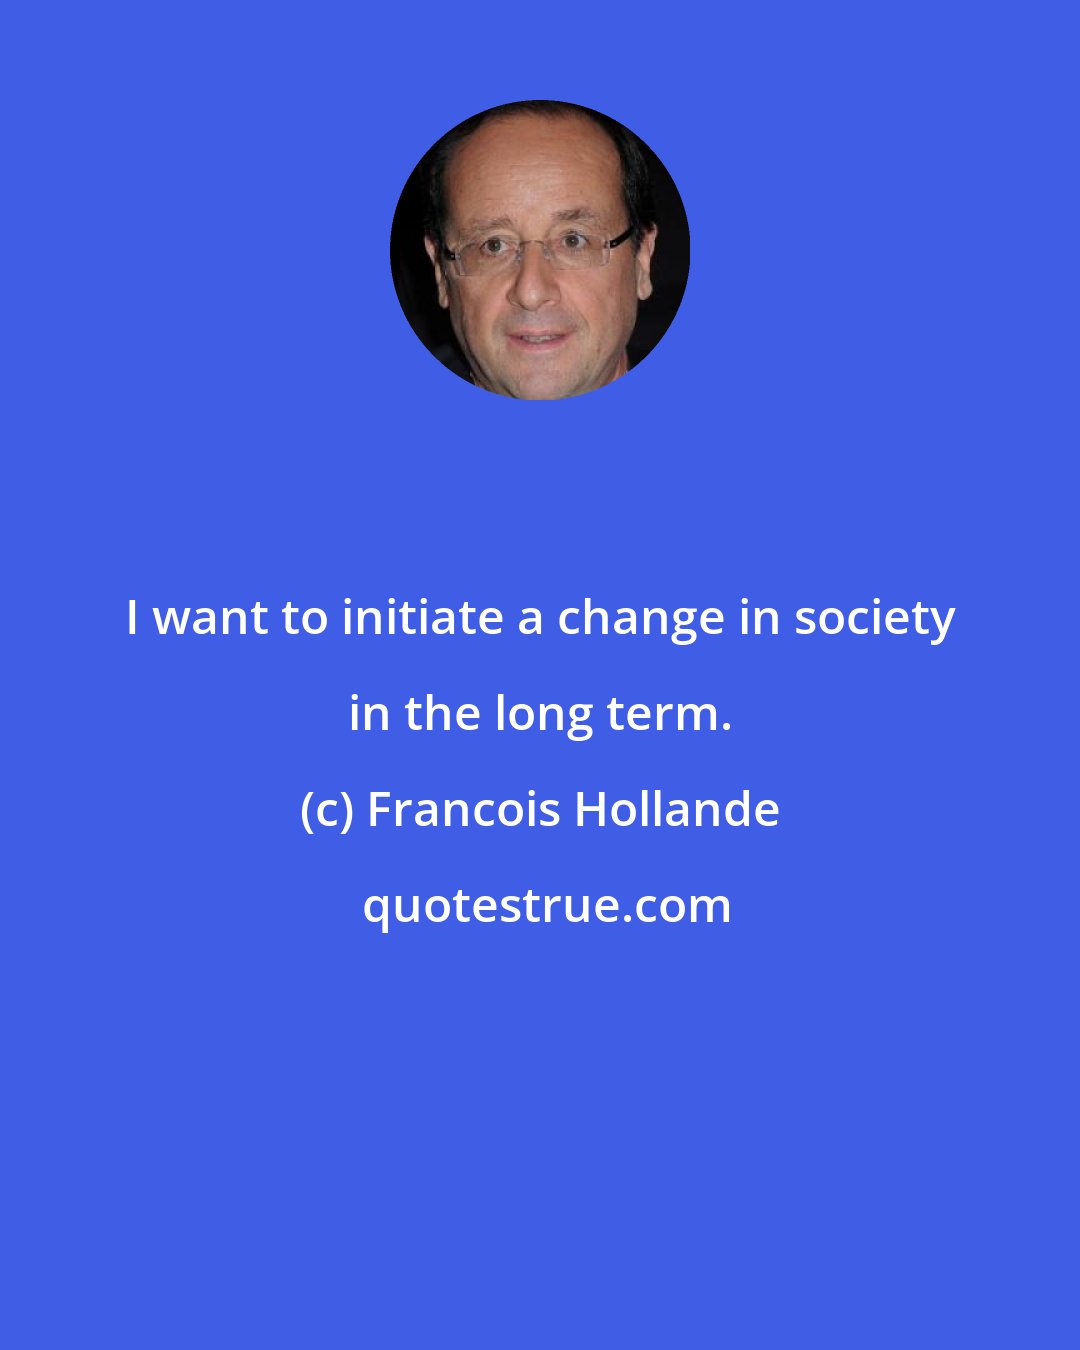 Francois Hollande: I want to initiate a change in society in the long term.